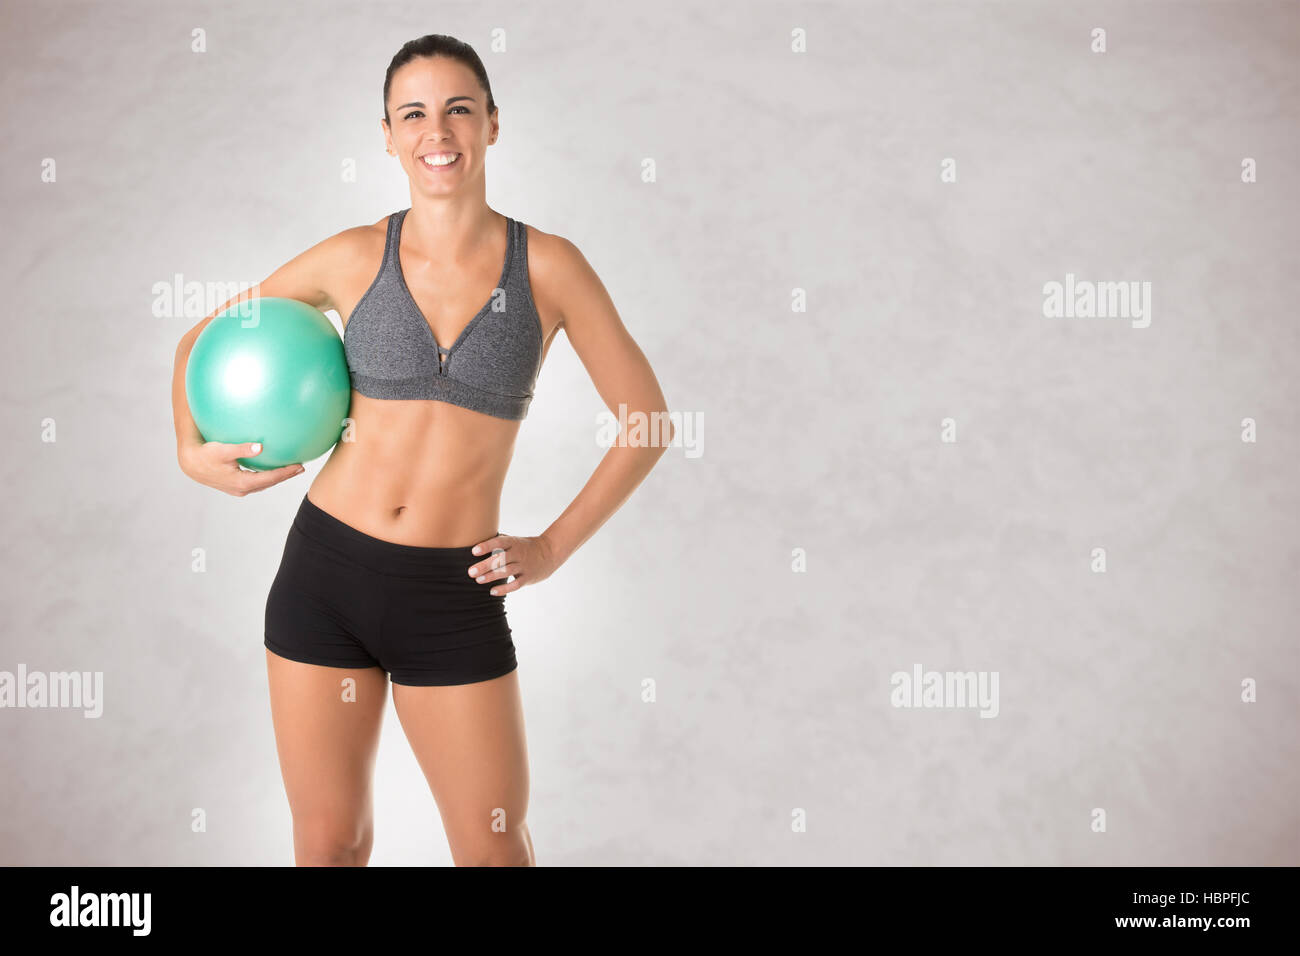 Fit Woman Standing Holding a Pilates Ball Stock Photo